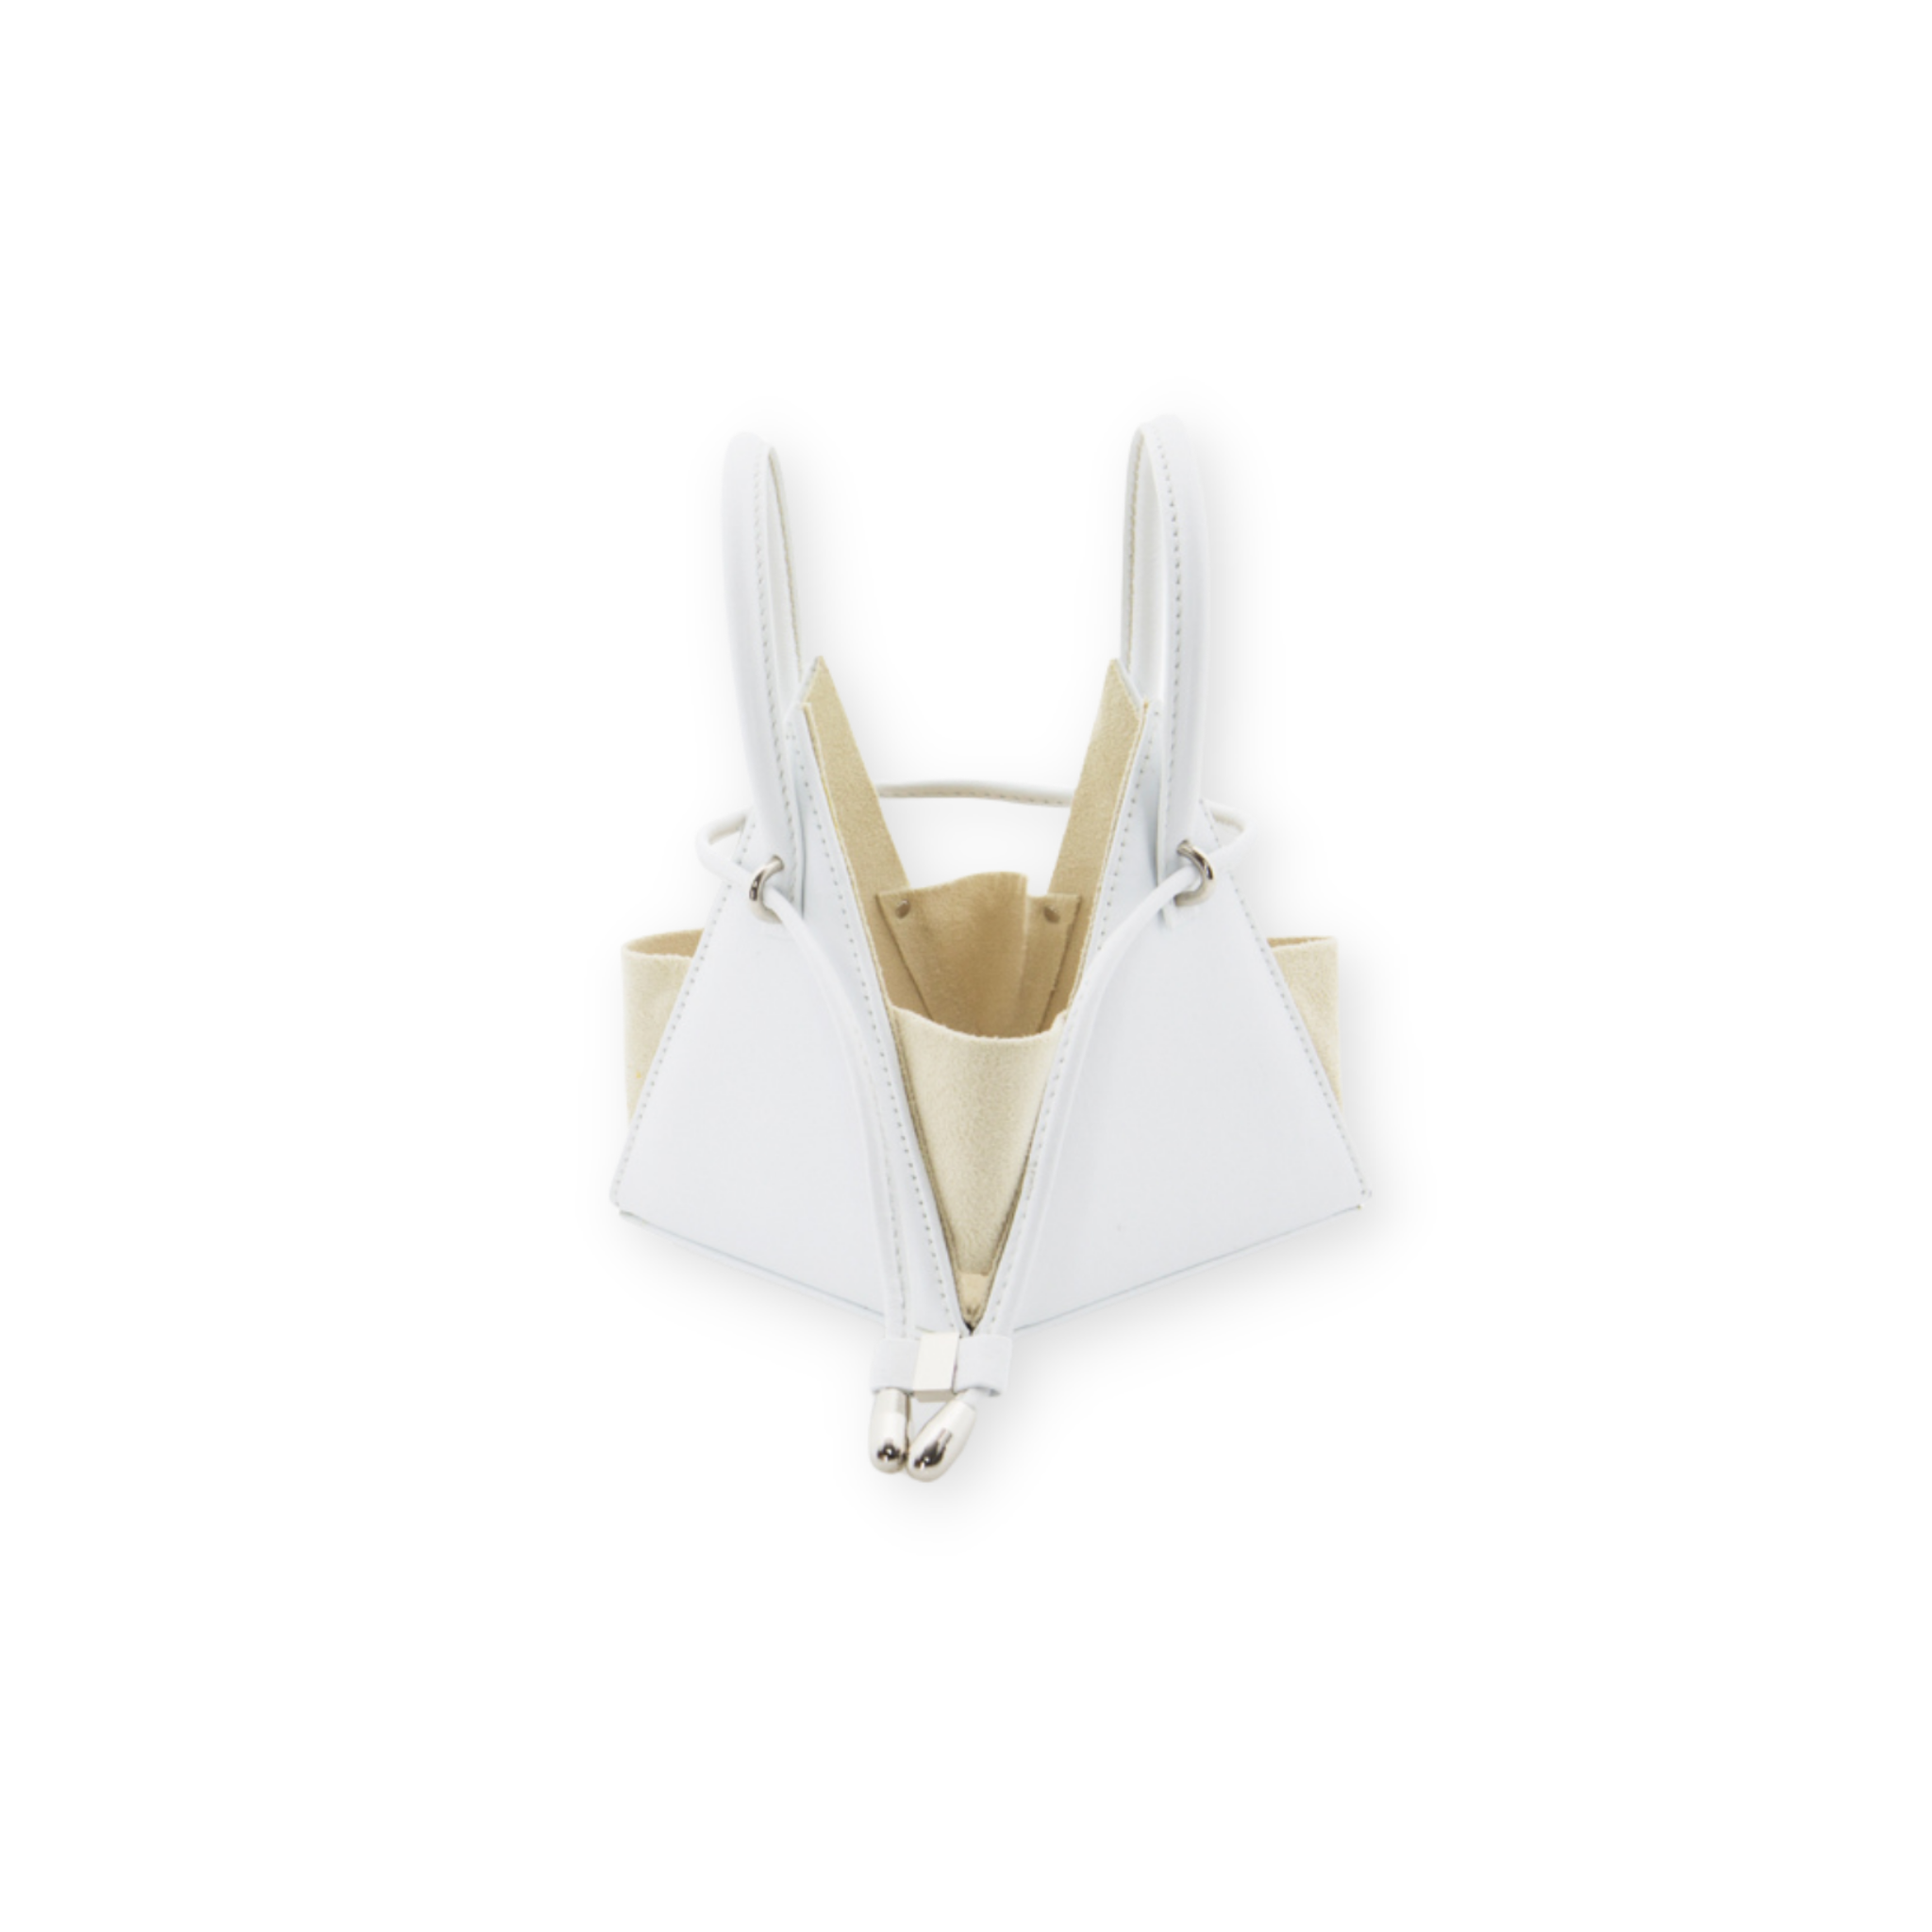 Buy now the Iconic LIA Mini bag inspired by the geometric shapes of our designer's birth city Barcelona, and its world known artist, Antonio Gaudí, architect of the world wonder La Sagrada Familia. The Iconic Lia White Mini bag has a unique and functional pyramidal design able to fit all your essentials. 